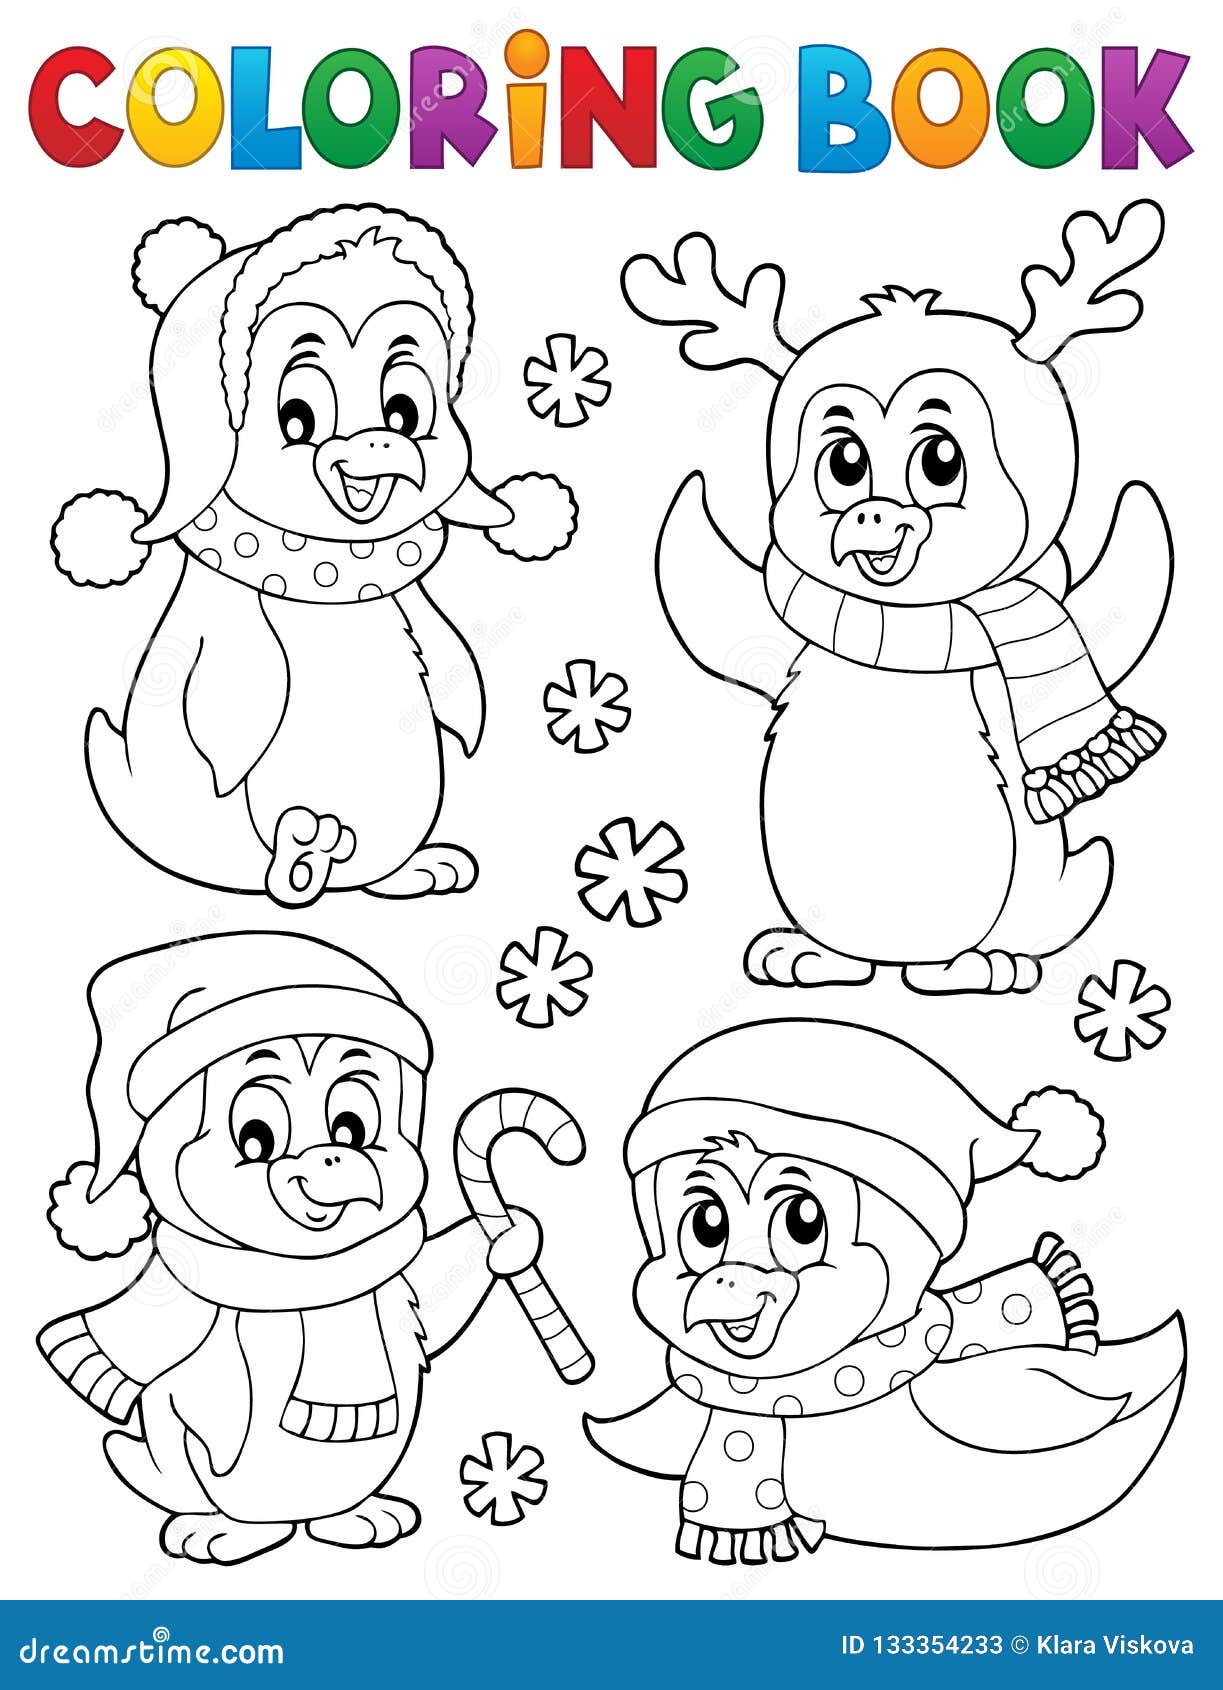 Coloring Book Christmas Penguins 2 Stock Vector - Illustration of